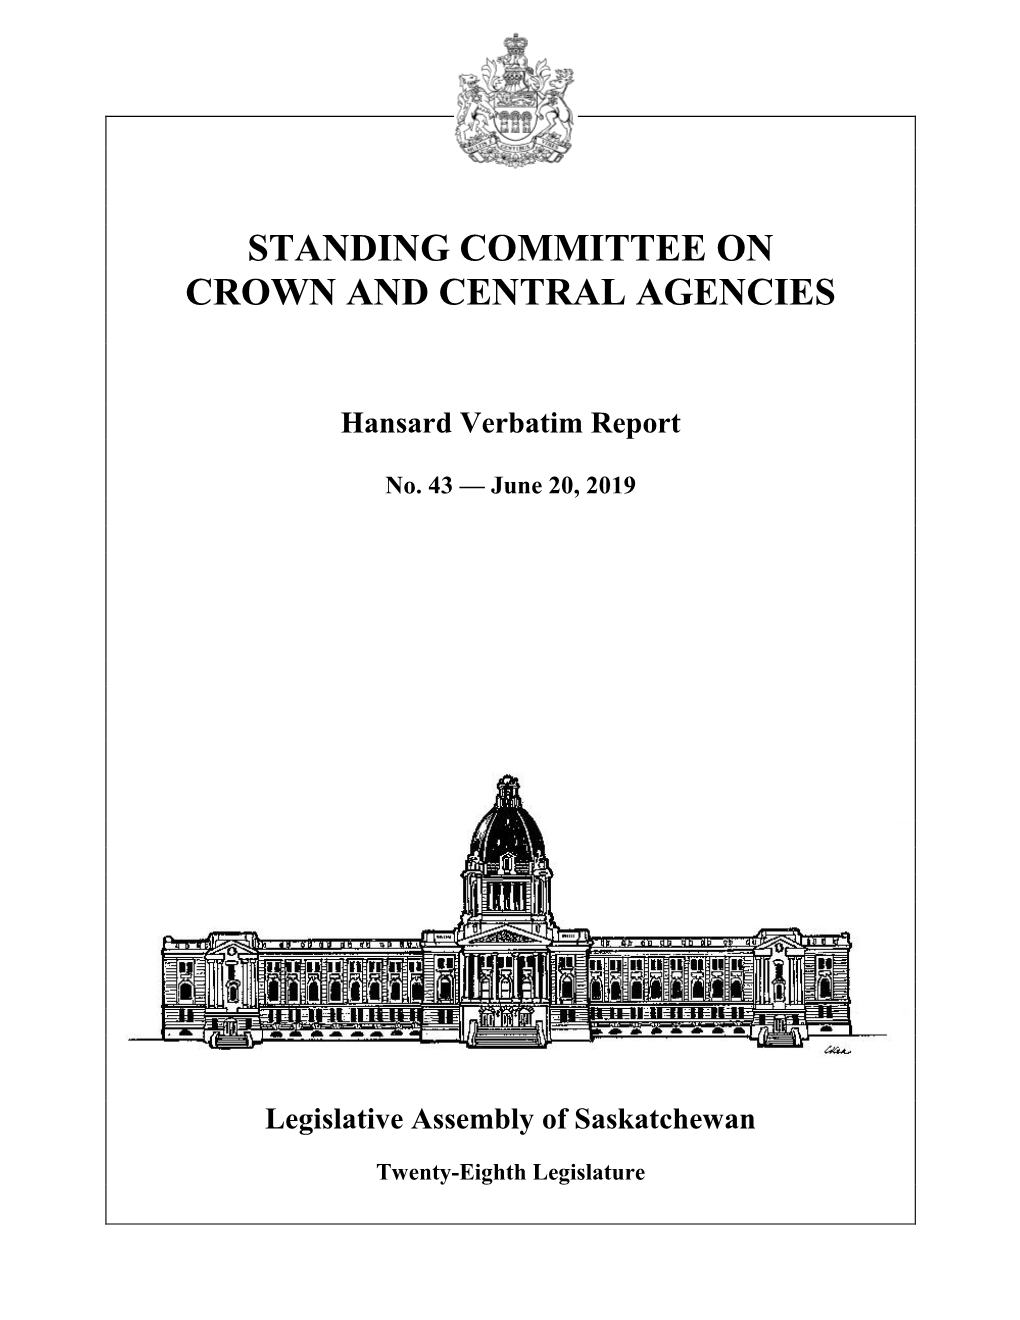 June 20, 2019 Crown and Central Agencies Committee